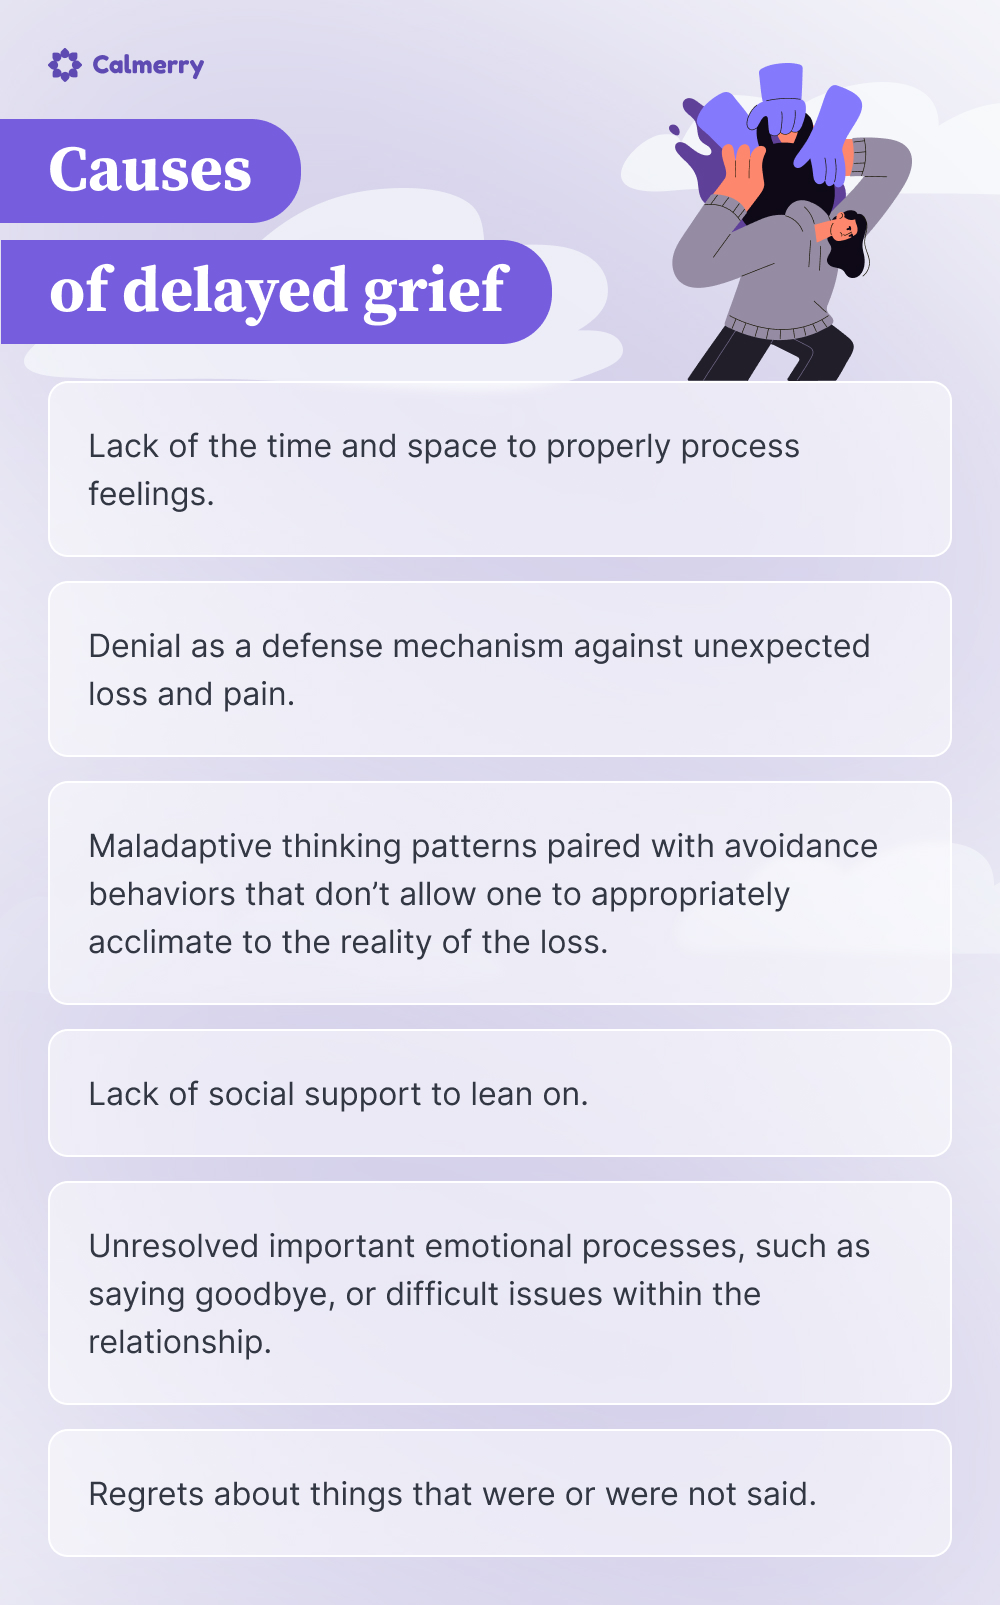 An infographic titled "Causes of delayed grief" by Calmerry. It lists six causes:

Lack of the time and space to properly process feelings.
Denial as a defense mechanism against unexpected loss and pain.
Maladaptive thinking patterns paired with avoidance behaviors that don't allow one to appropriately acclimate to the reality of the loss.
Lack of social support to lean on.
Unresolved important emotional processes, such as saying goodbye, or difficult issues within the relationship.
Regrets about things that were or were not said.

The image includes an illustration of a person overwhelmed by hands reaching towards them.